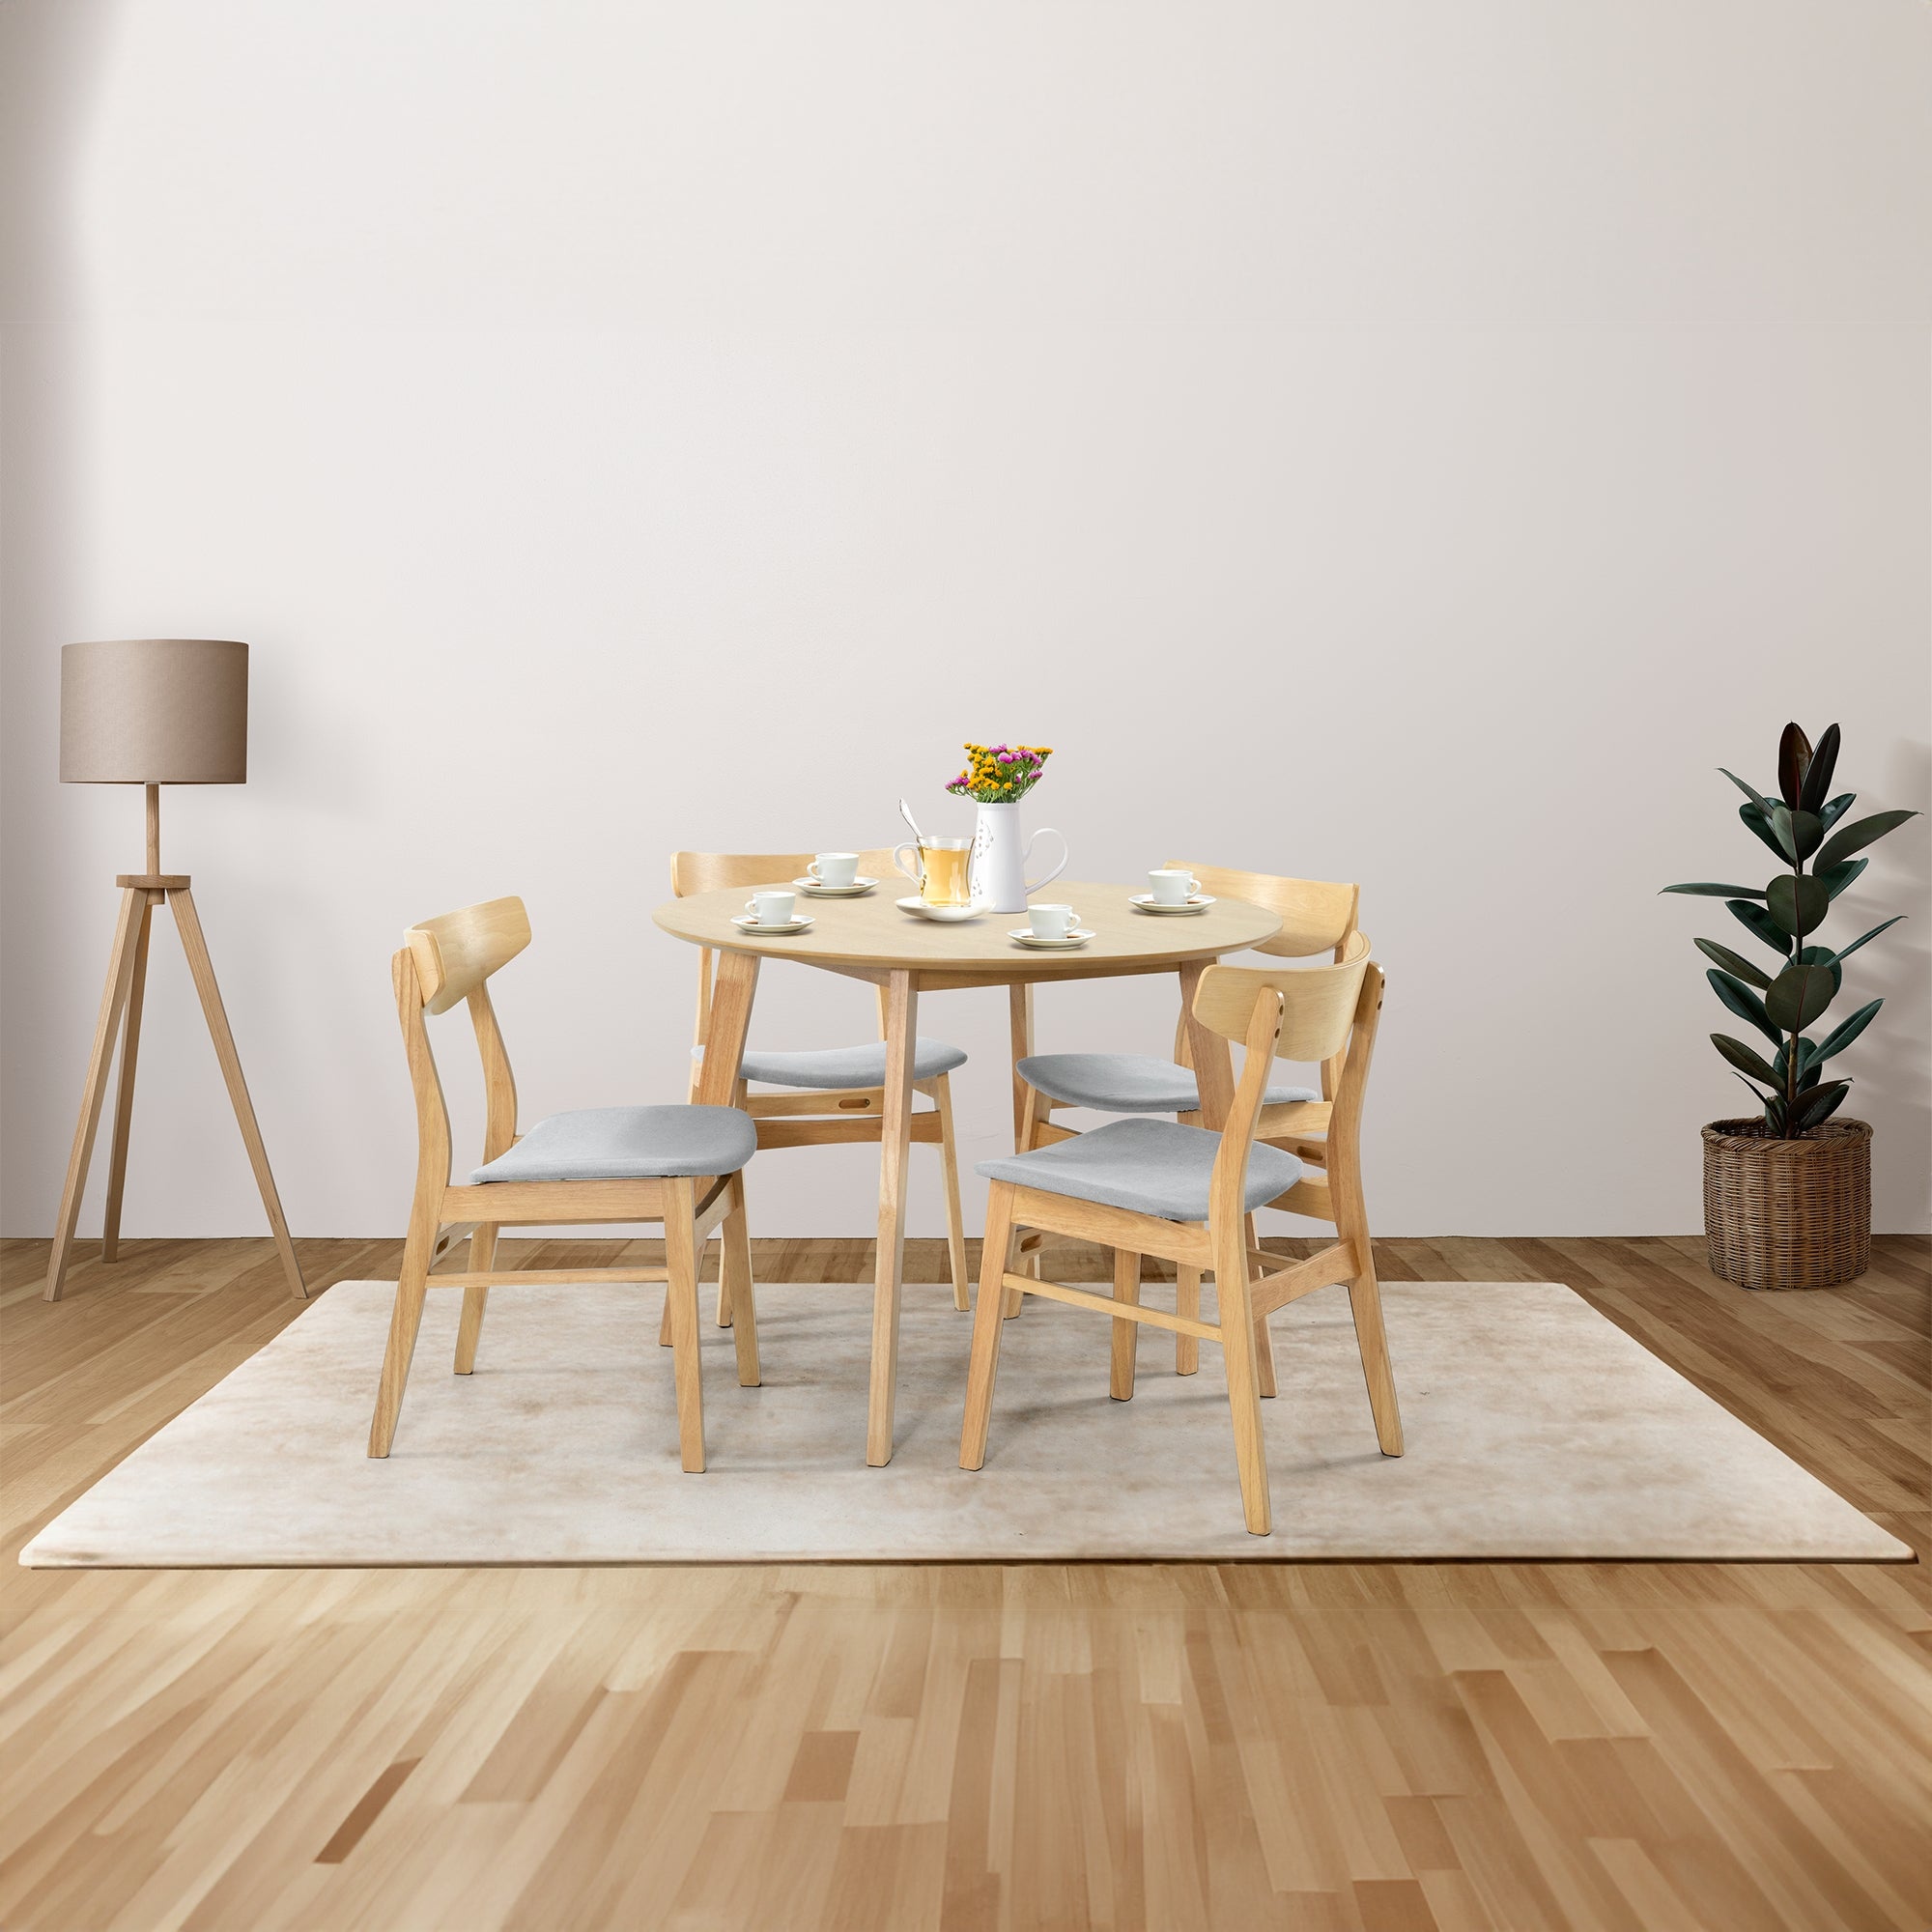 Natural Round 4-Seater Scandinavian Dining Table 100cm